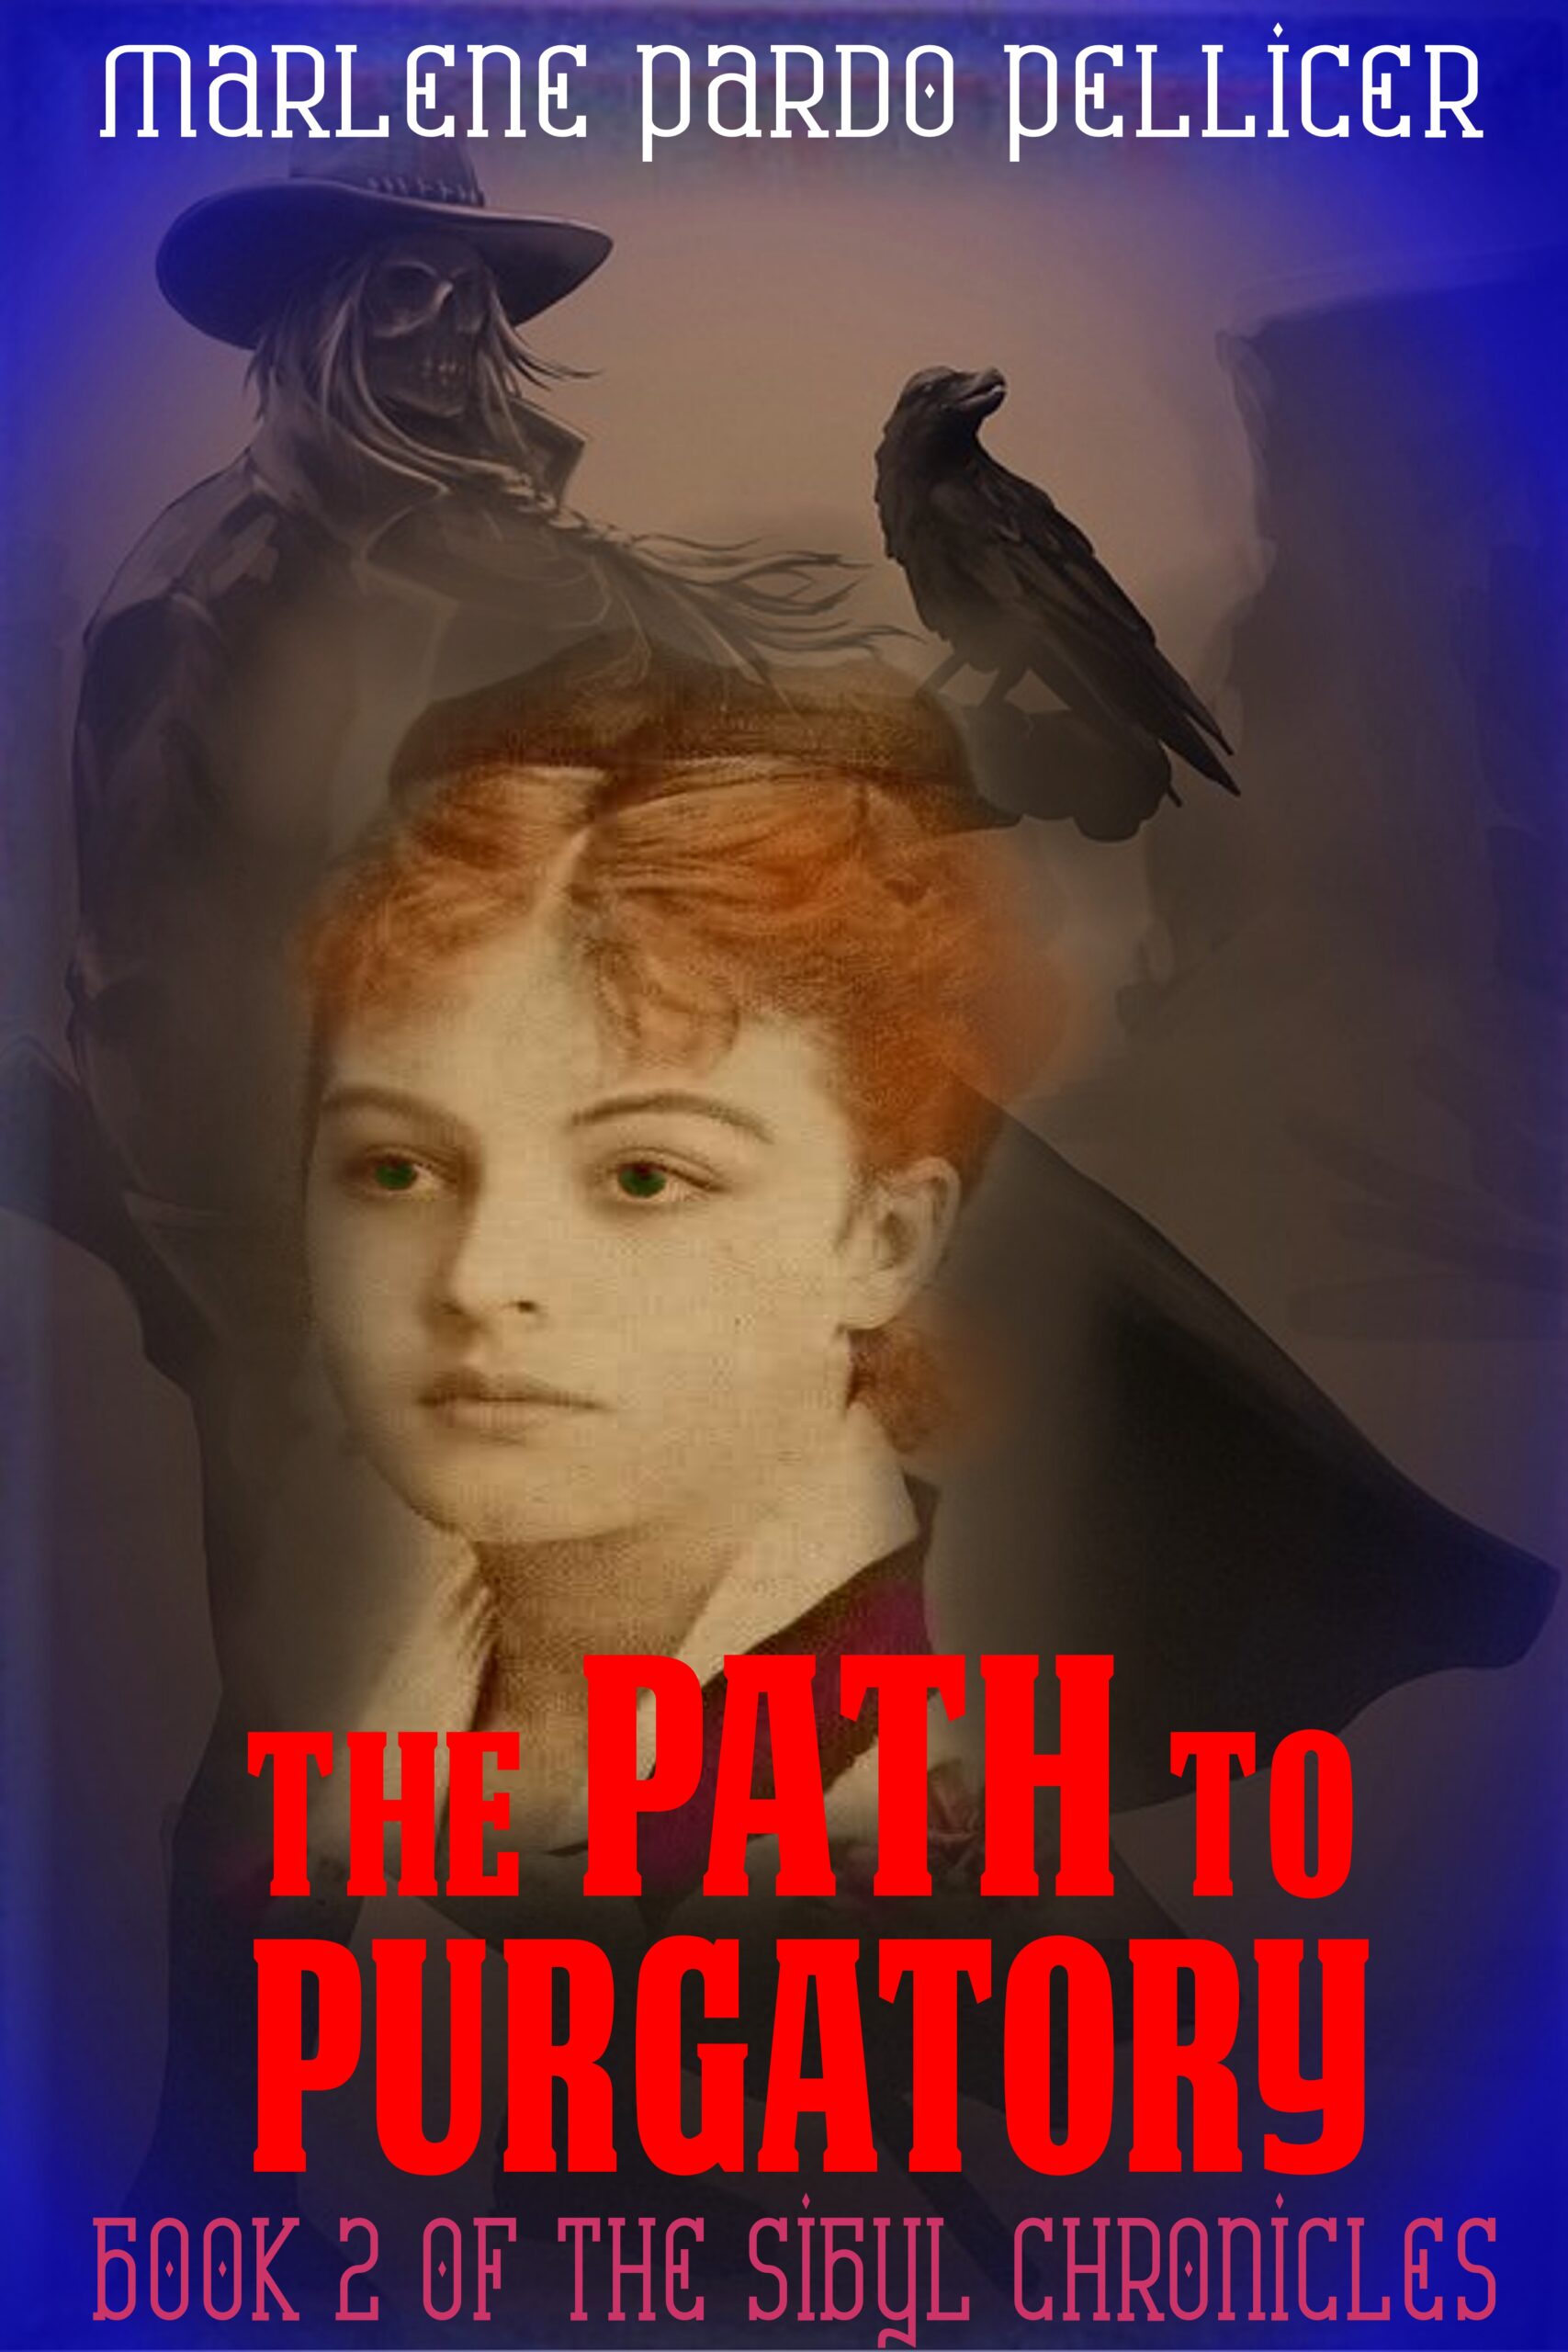 FREE: The Path to Purgatory (Book 2 of the Sibyl Chronicles) by Marlene Pardo Pellicer